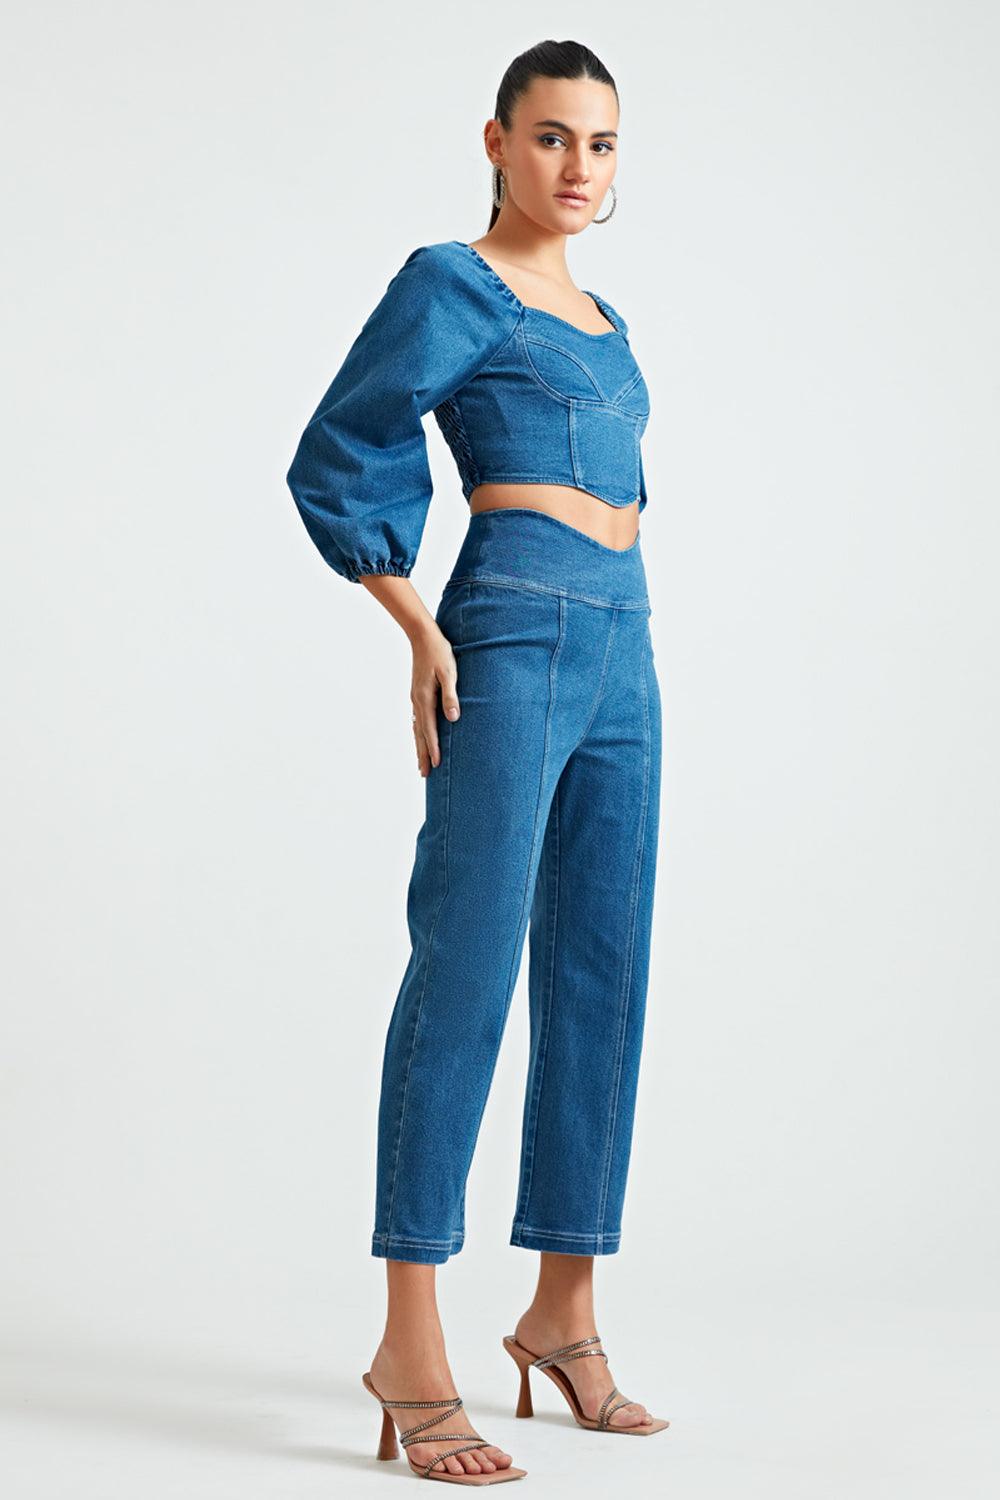 Blue Corset Co-ord Top - ANI CLOTHING